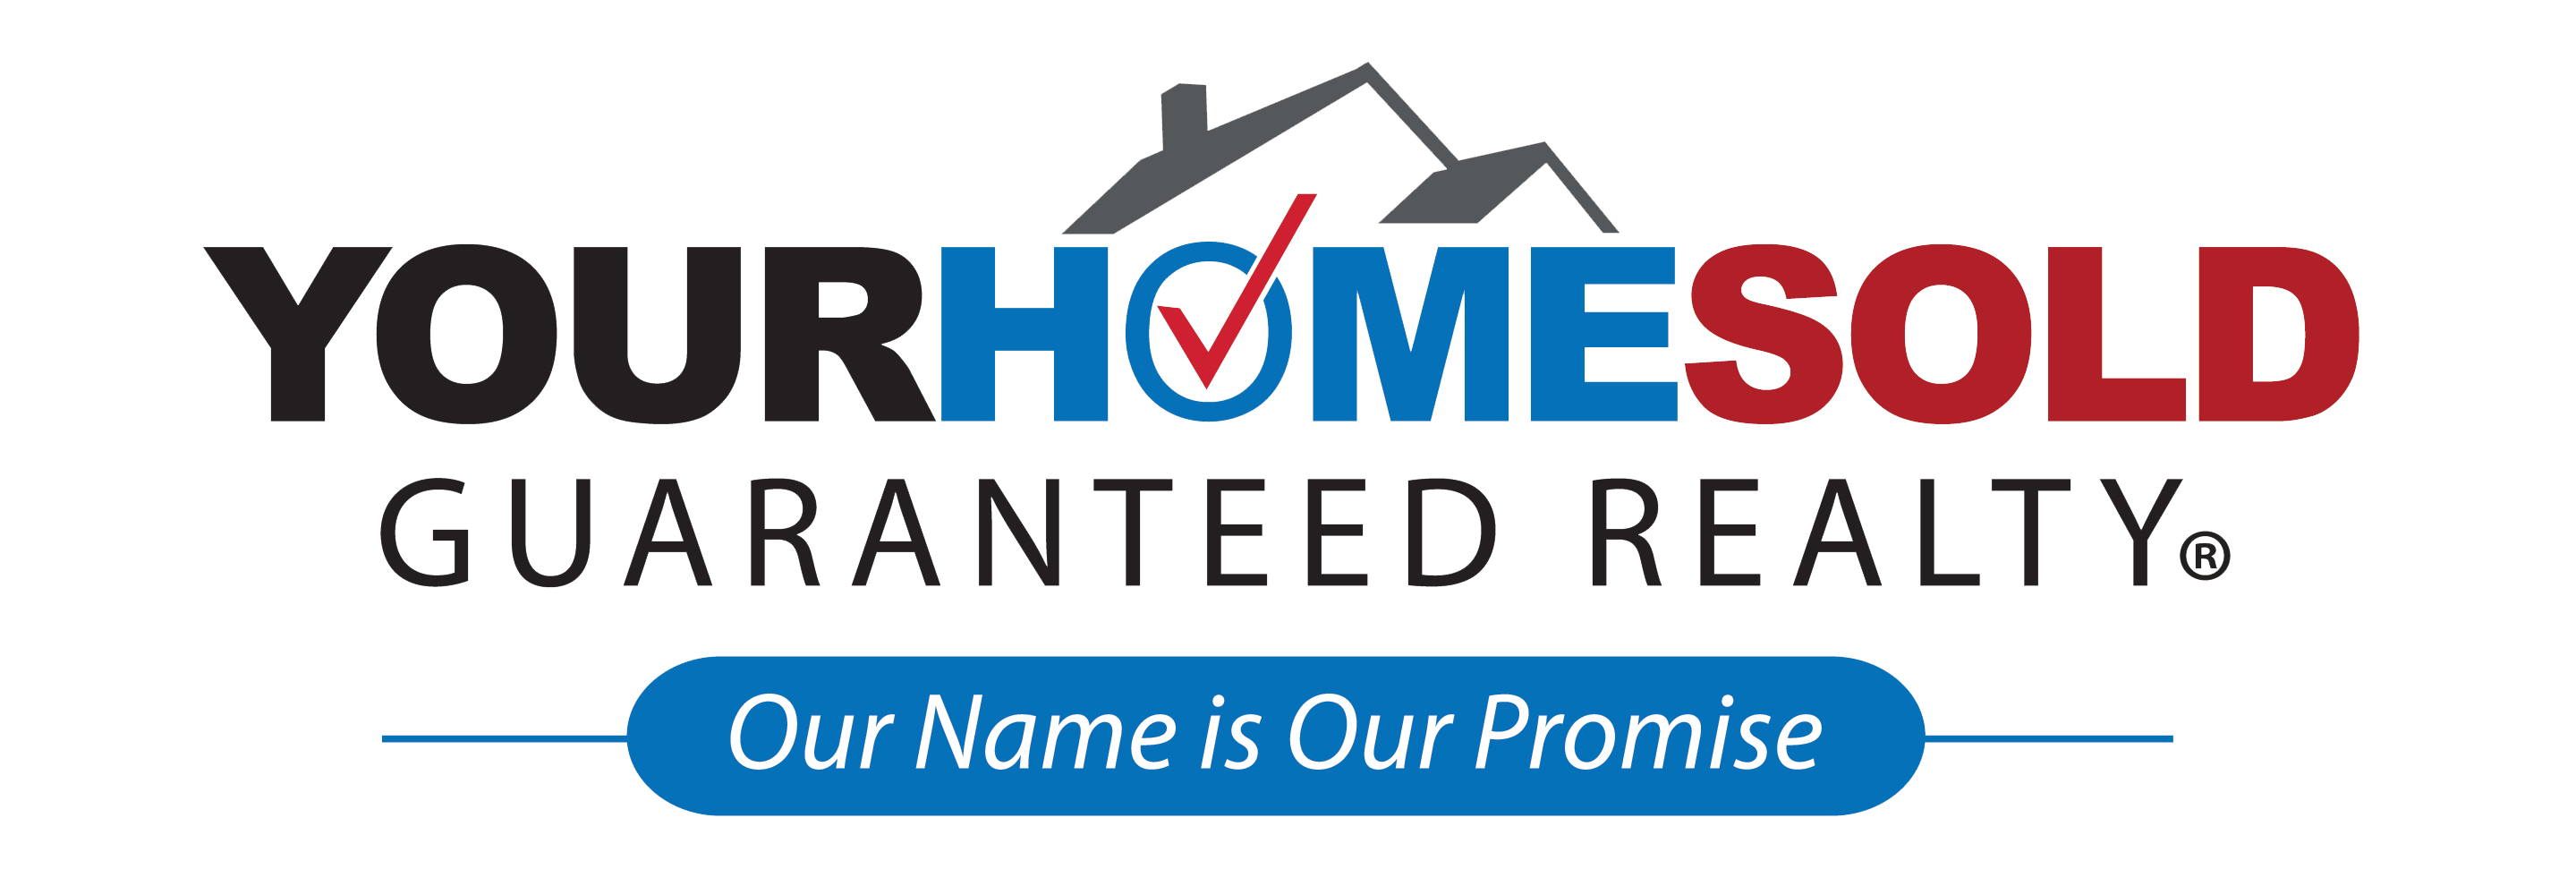 Your Home Sold Guaranteed Realty Chris Schmidt logo